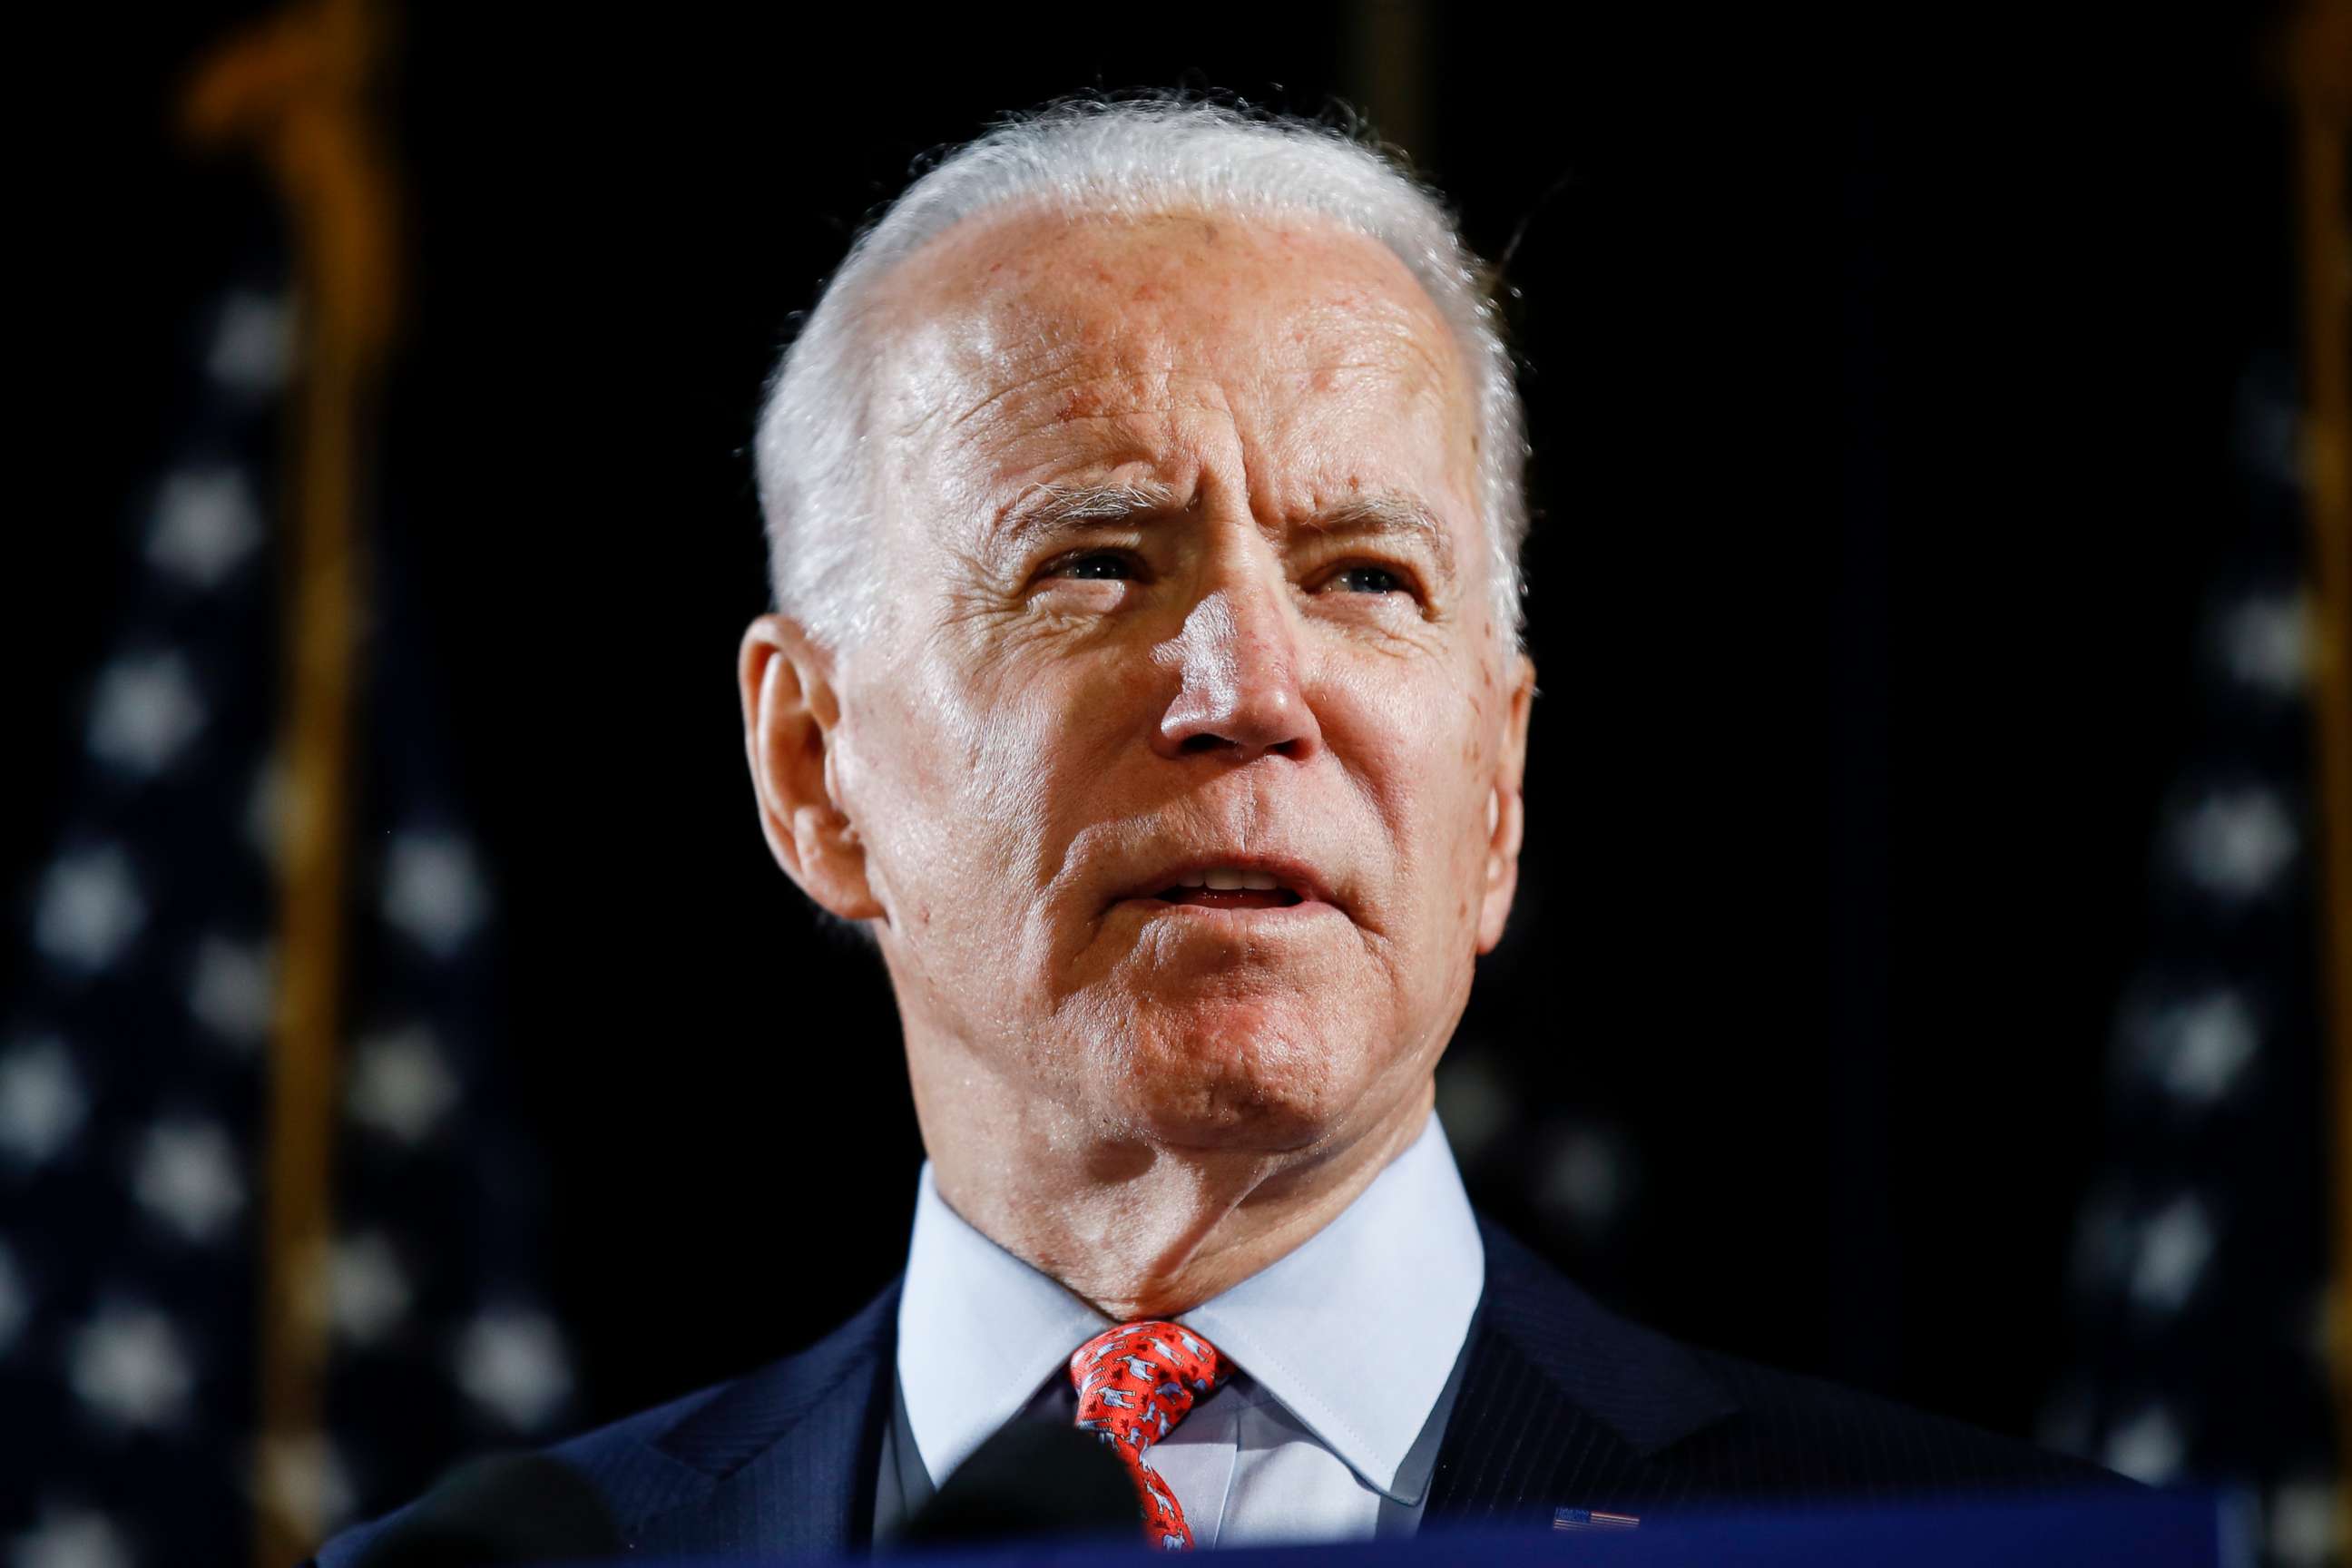 PHOTO: Democratic presidential candidate former Vice President Joe Biden speaks about the coronavirus Thursday, March 12, 2020, in Wilmington, Del.